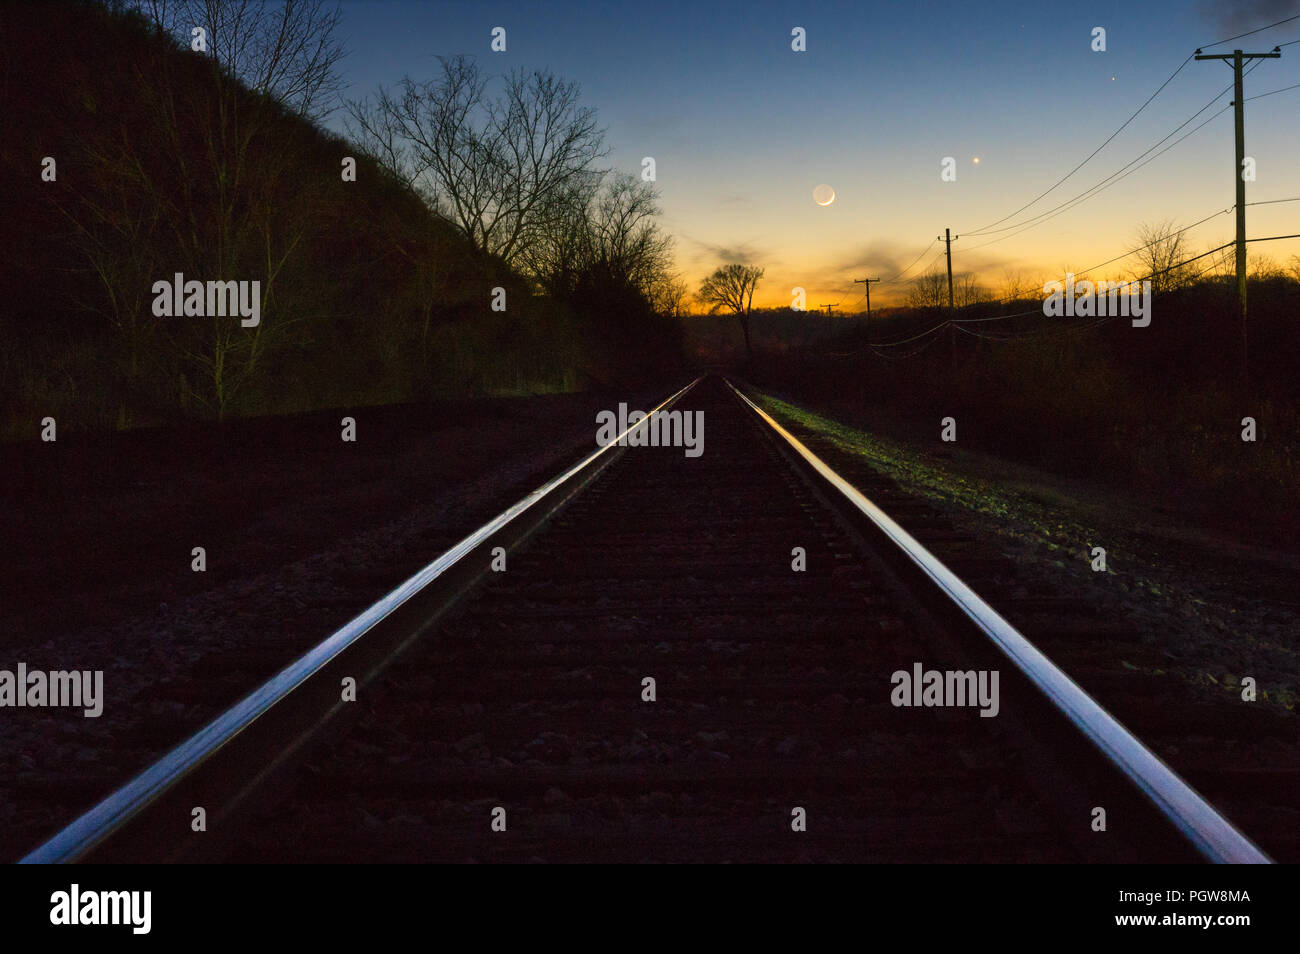 Mercury, Venus, and a waxing crescent moon line the evening sky above the setting sun and a set of railroad tracks. Stock Photo